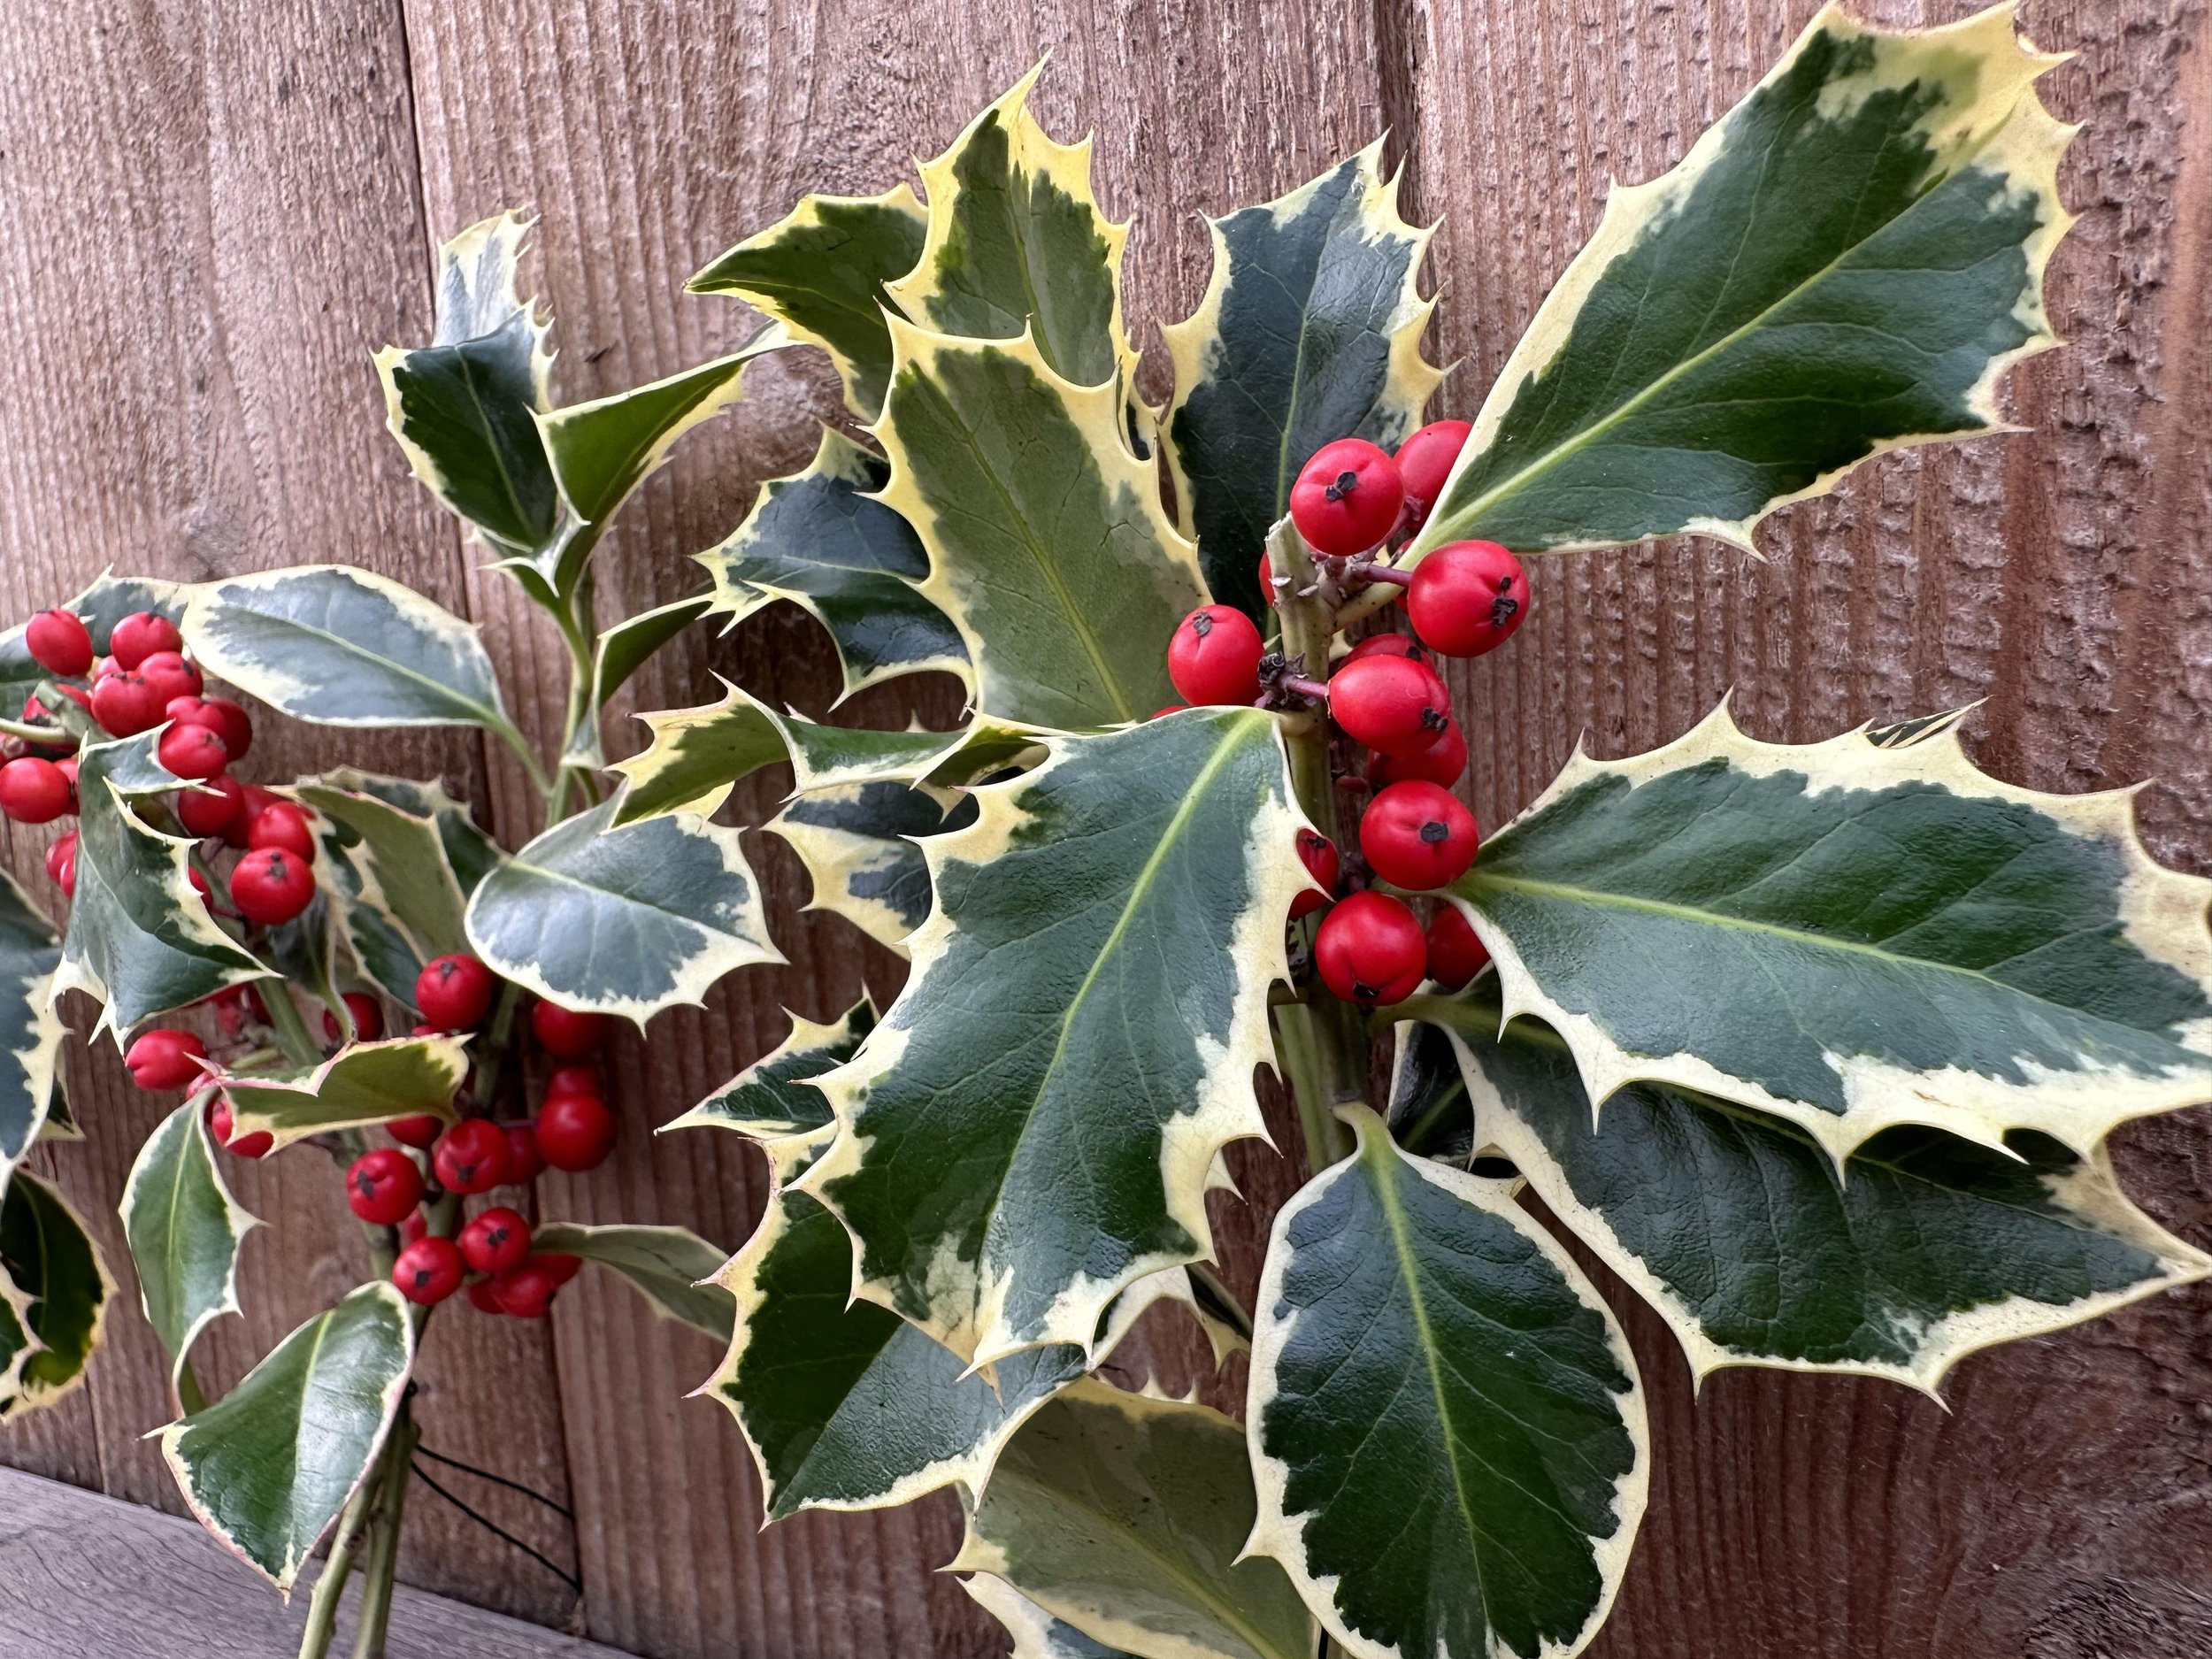 variegated holly bunches from the side.jpg